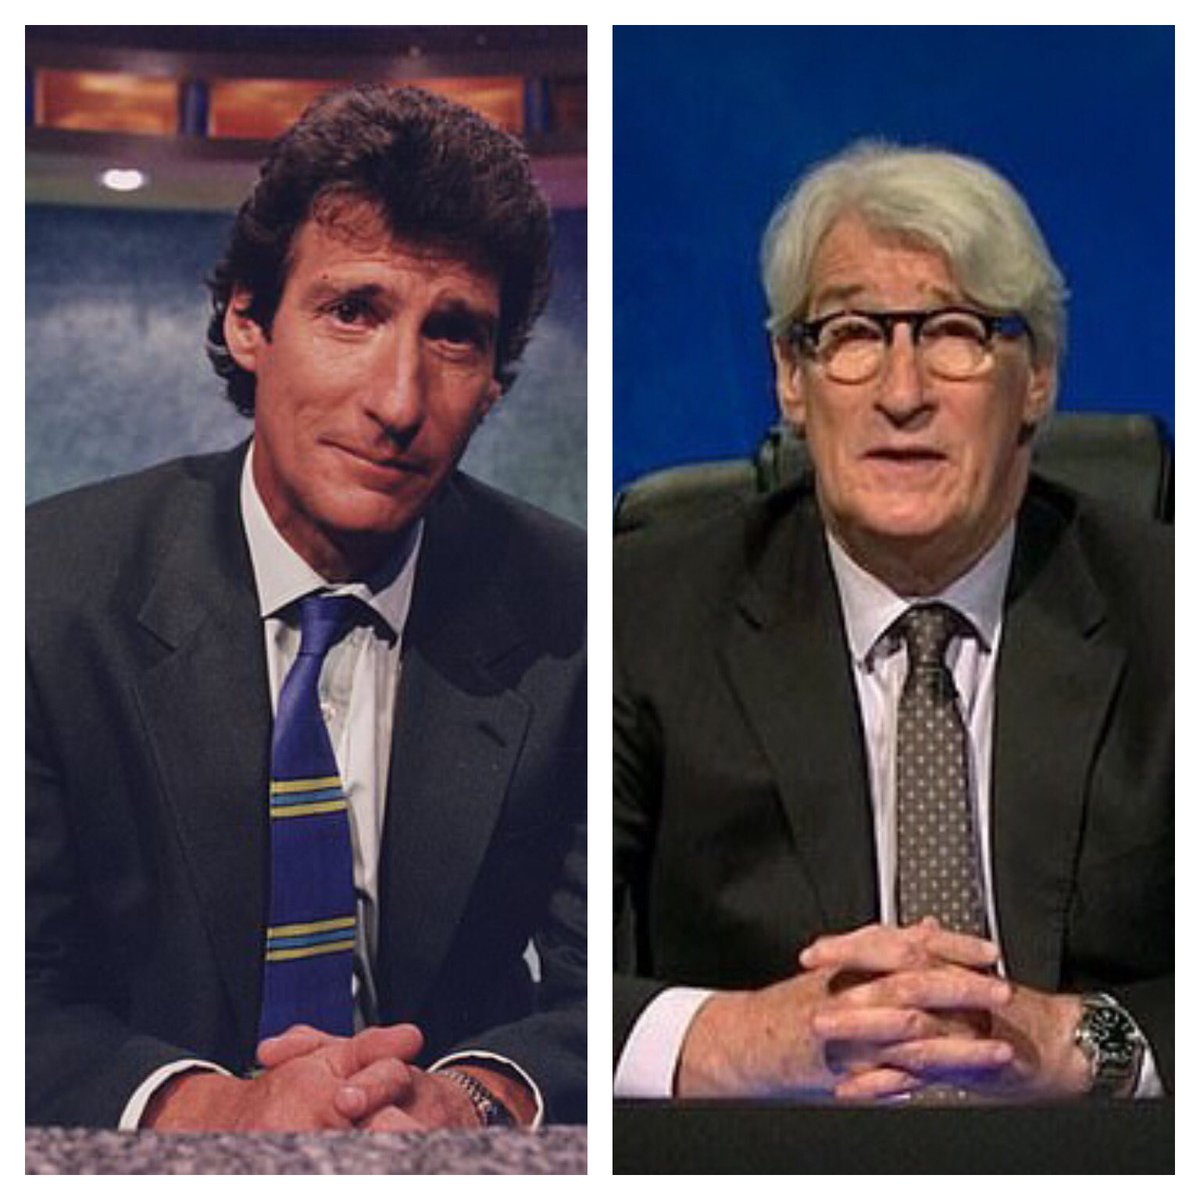 After 28 years as host of University Challenge that sign off from Jeremy Paxman was understated but brilliant.

“University challenge returns next year and I look forward to watching it with you” 

Legend ❤️

#legend #UniversityChallenge #jeremypaxman #paxman #grandfinal